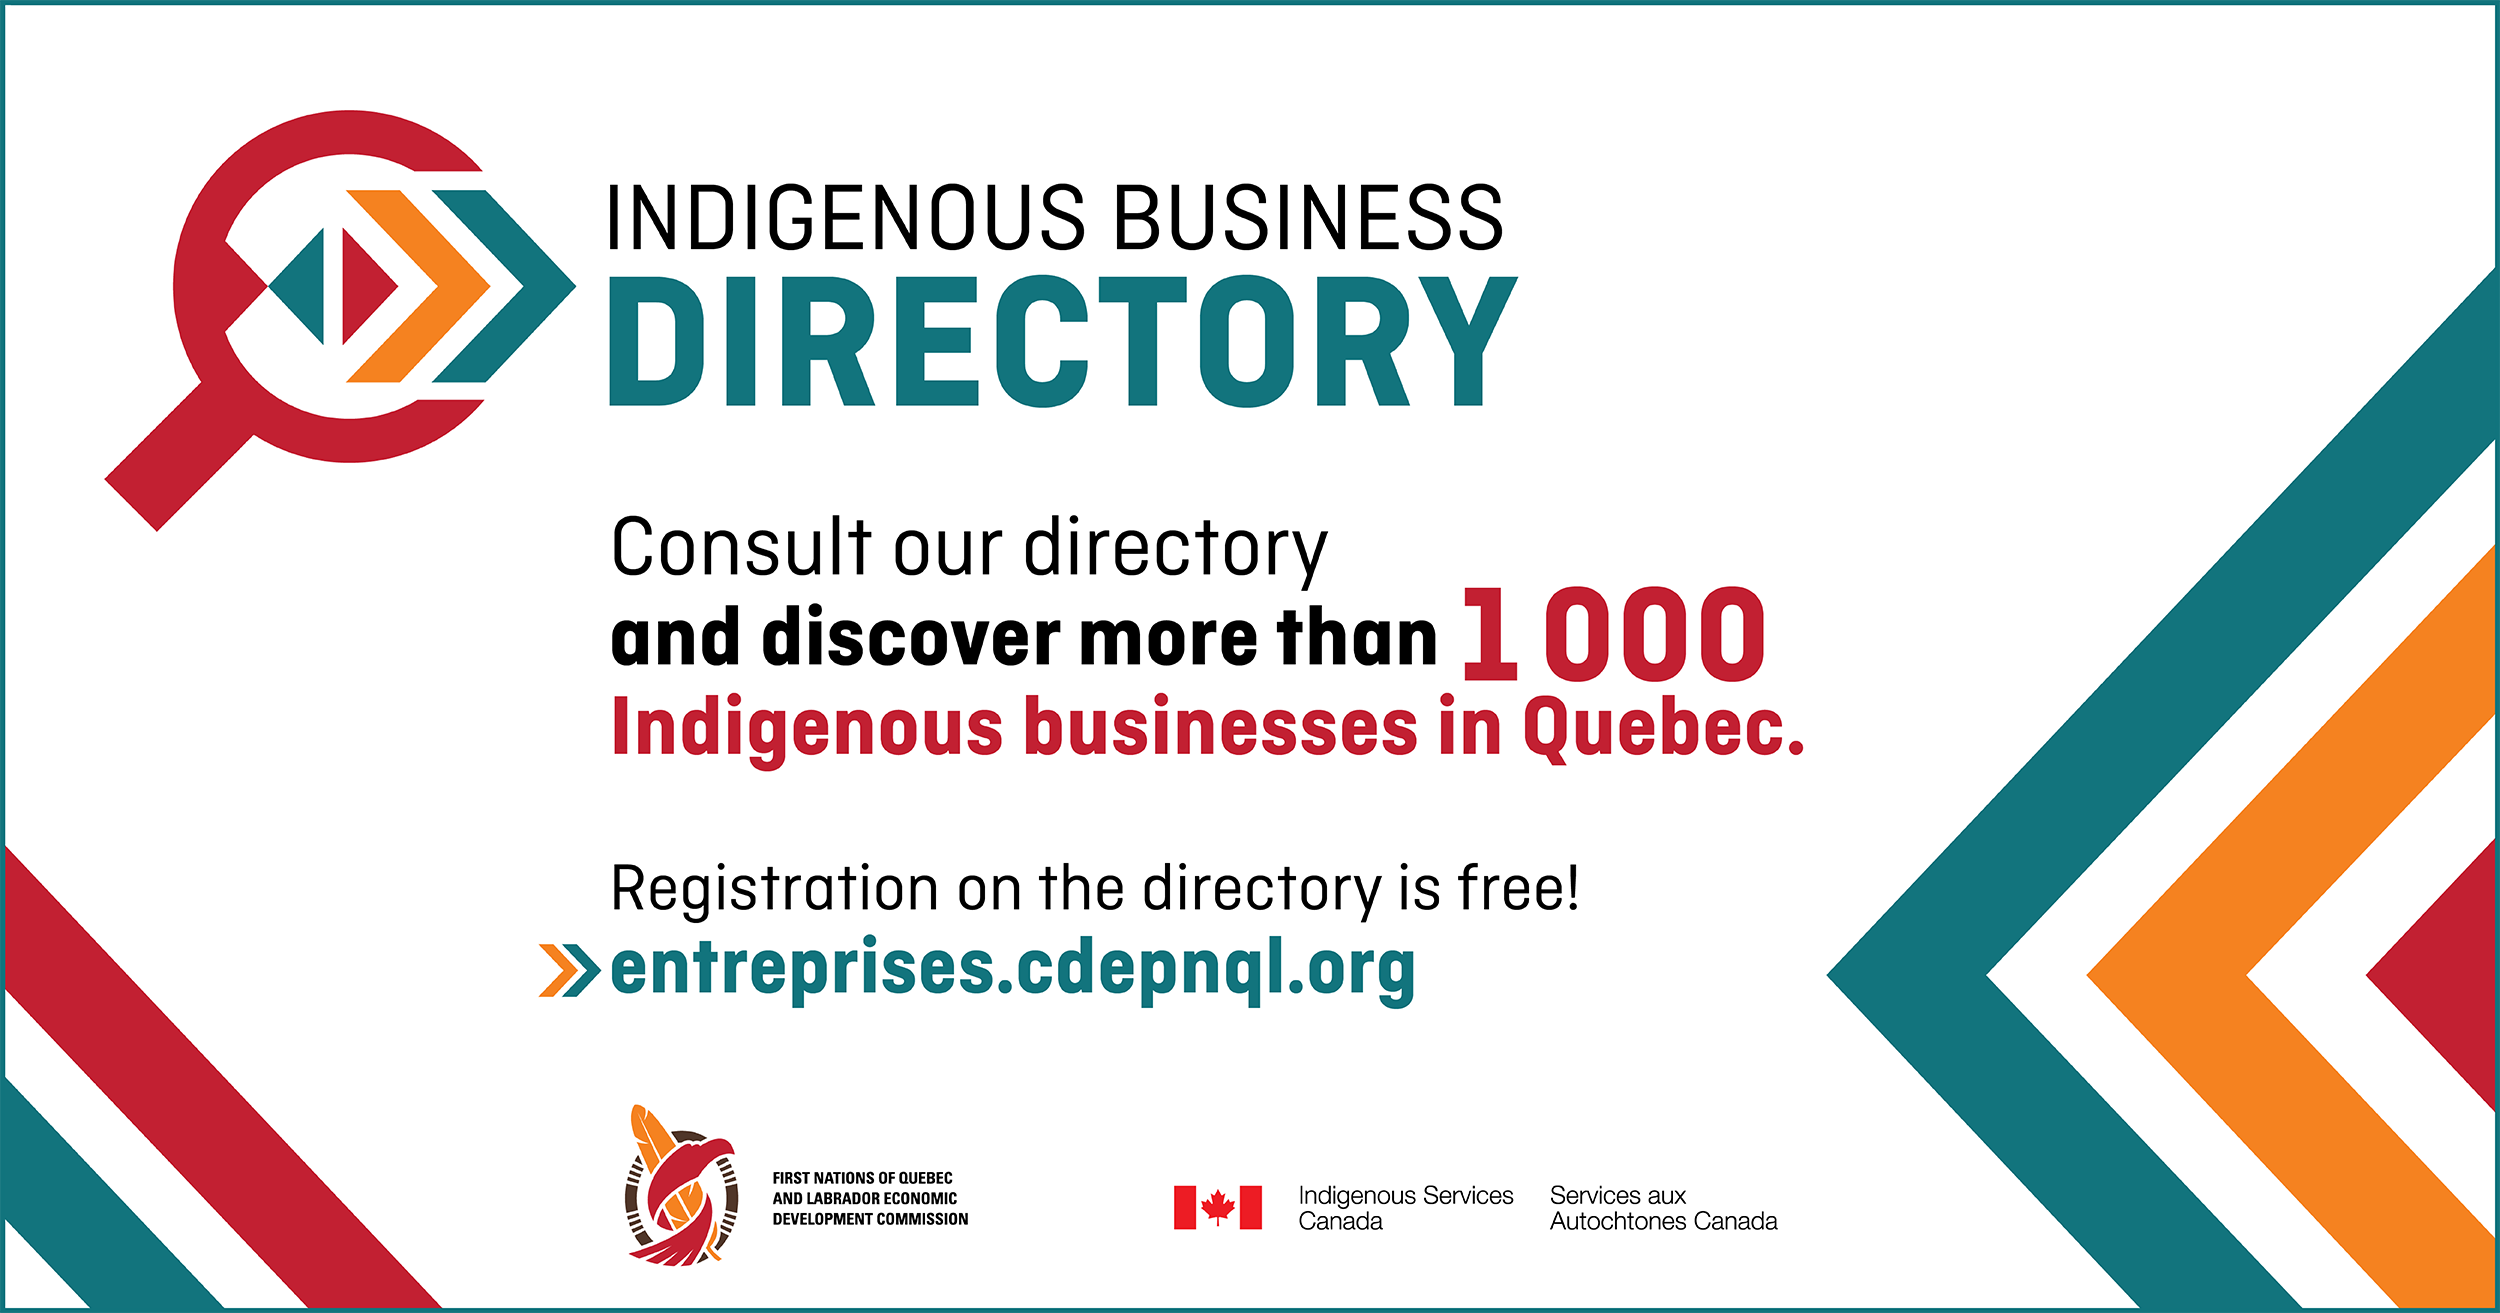 Indigenous Business Directory: Showcase the Know-How of First Nations Communities